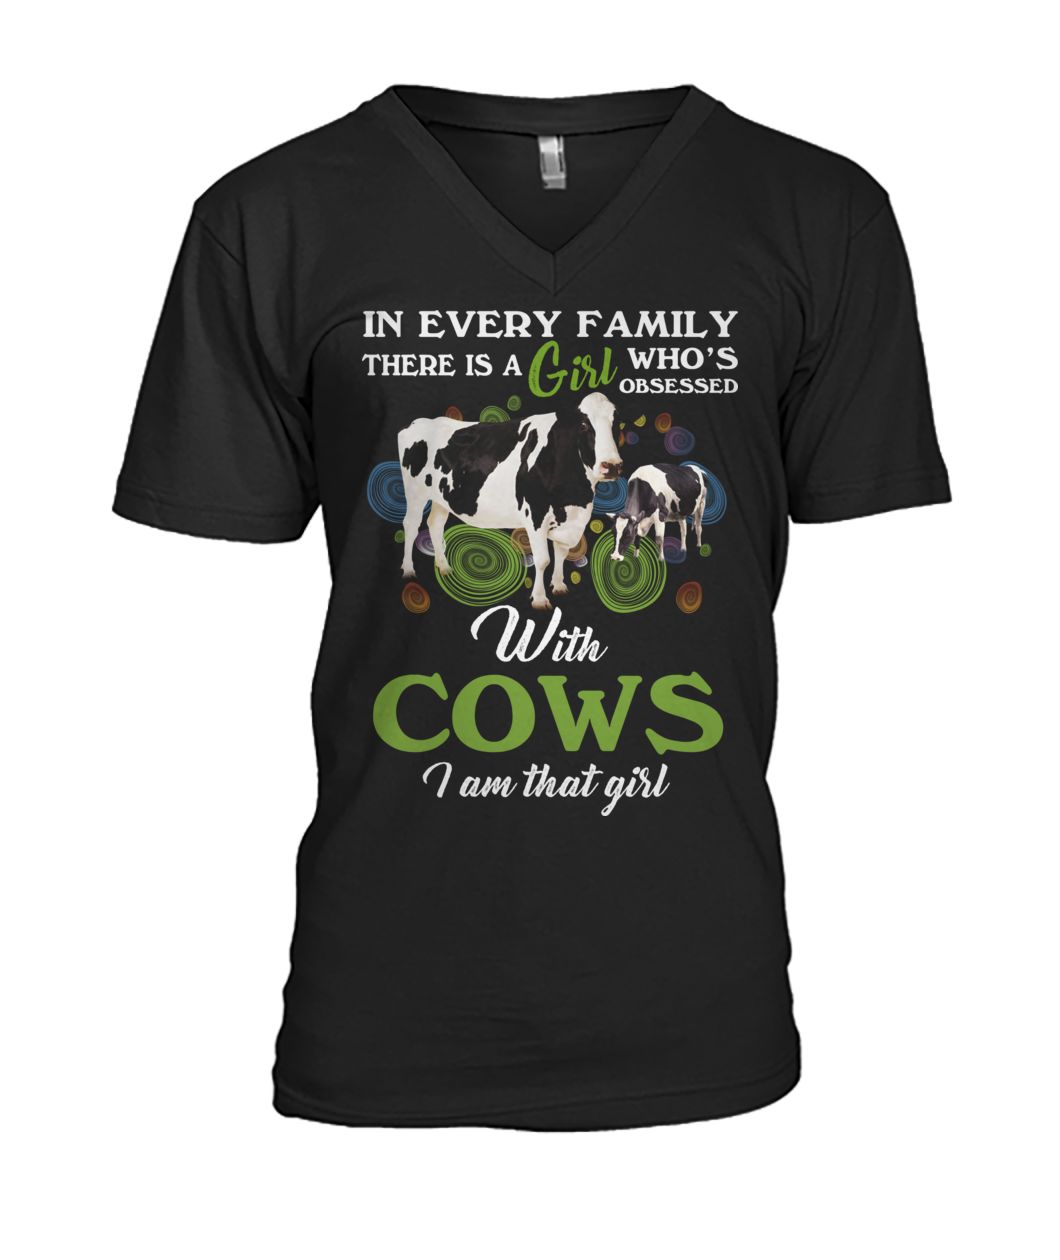 In every family there is a girl who's obsessed with cows I am that girl mens v-neck